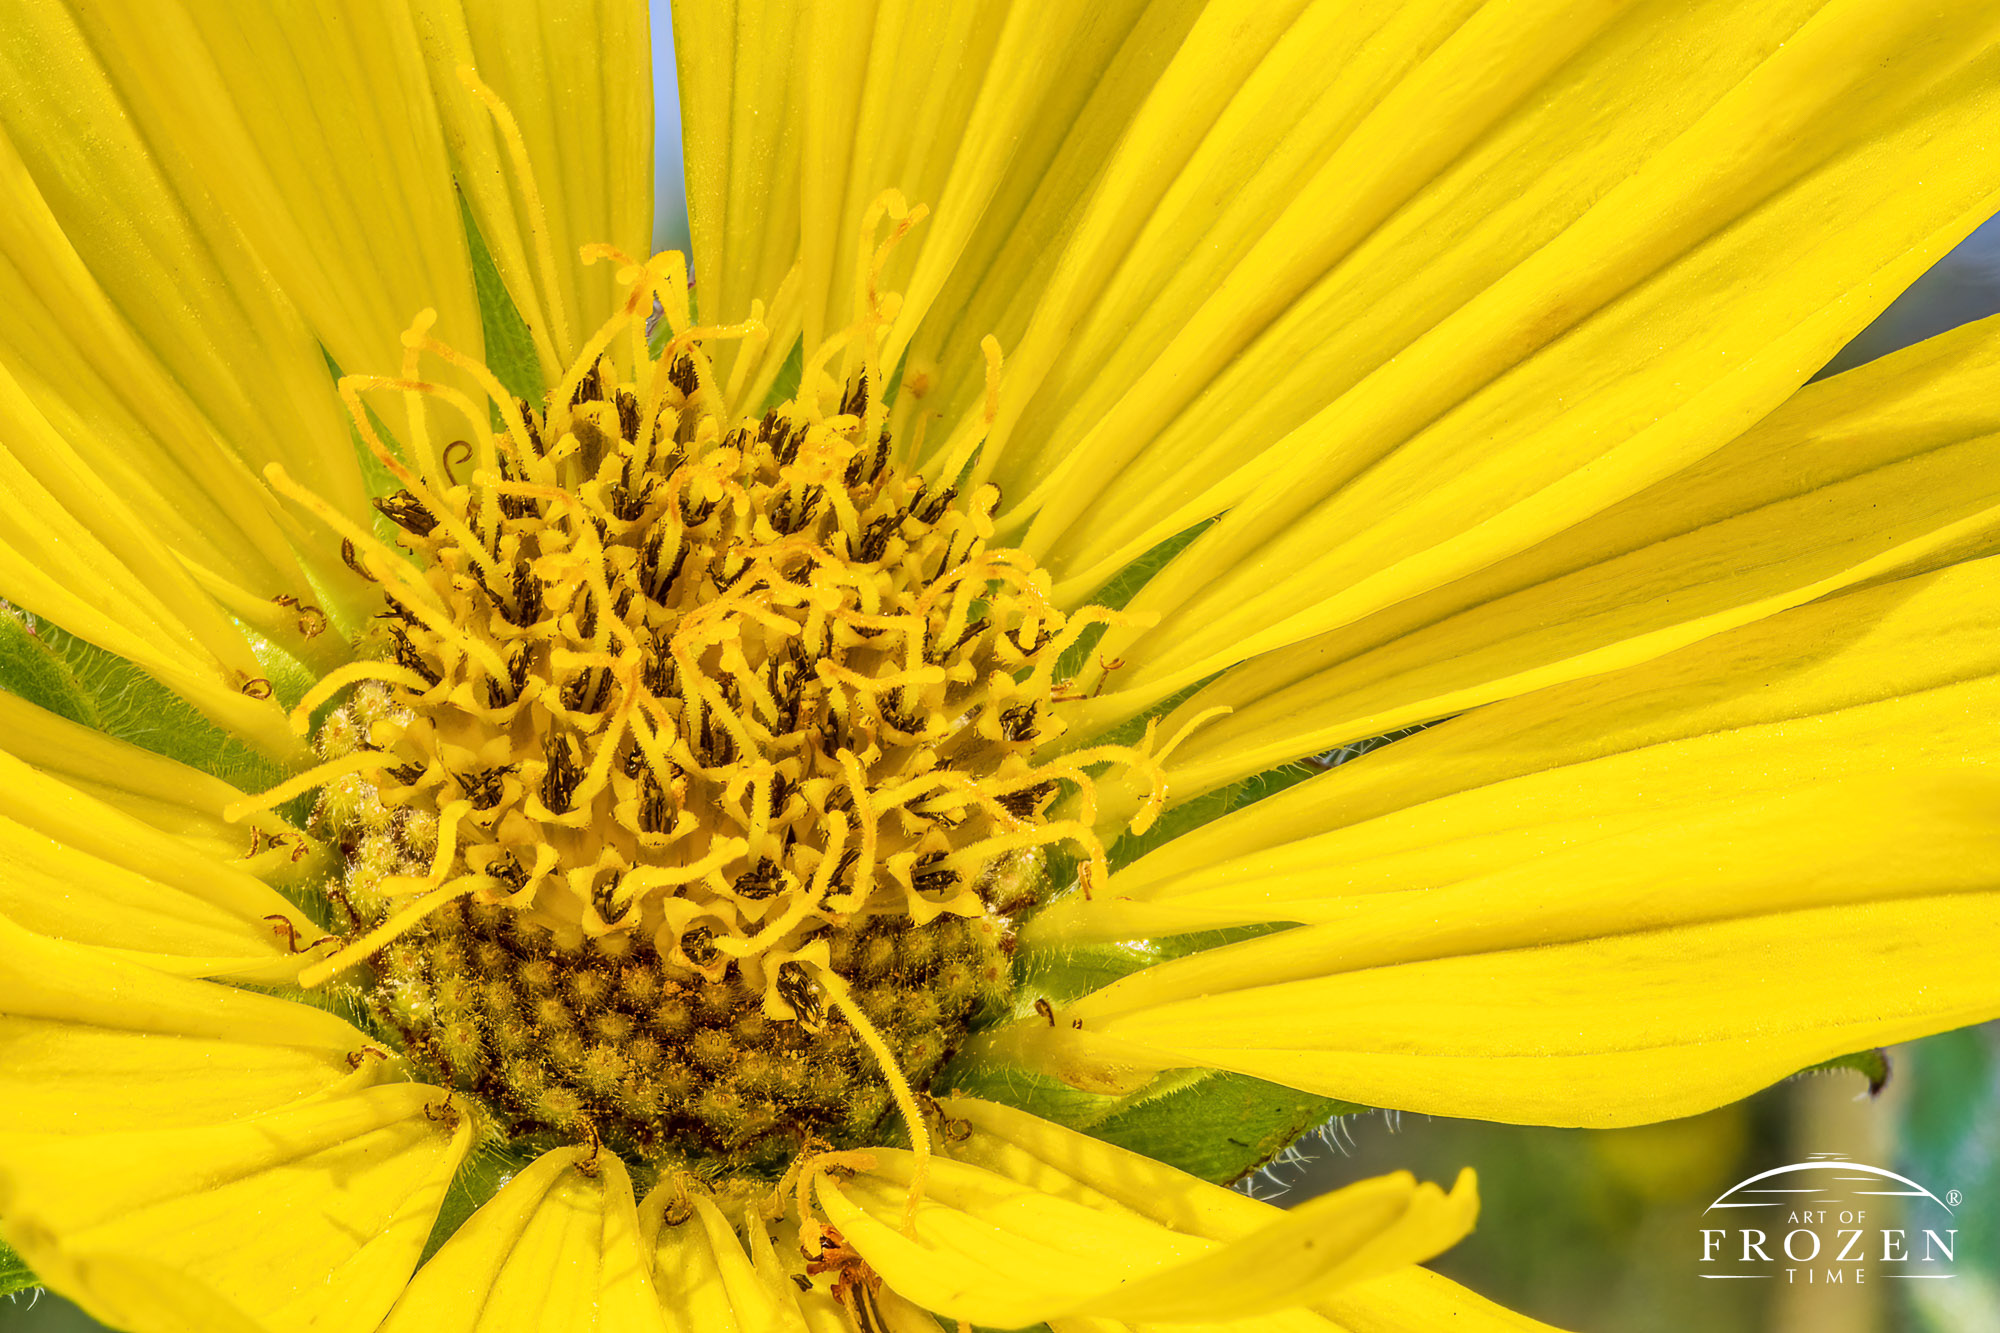 A macro view of the center of a Prairie Dock flower